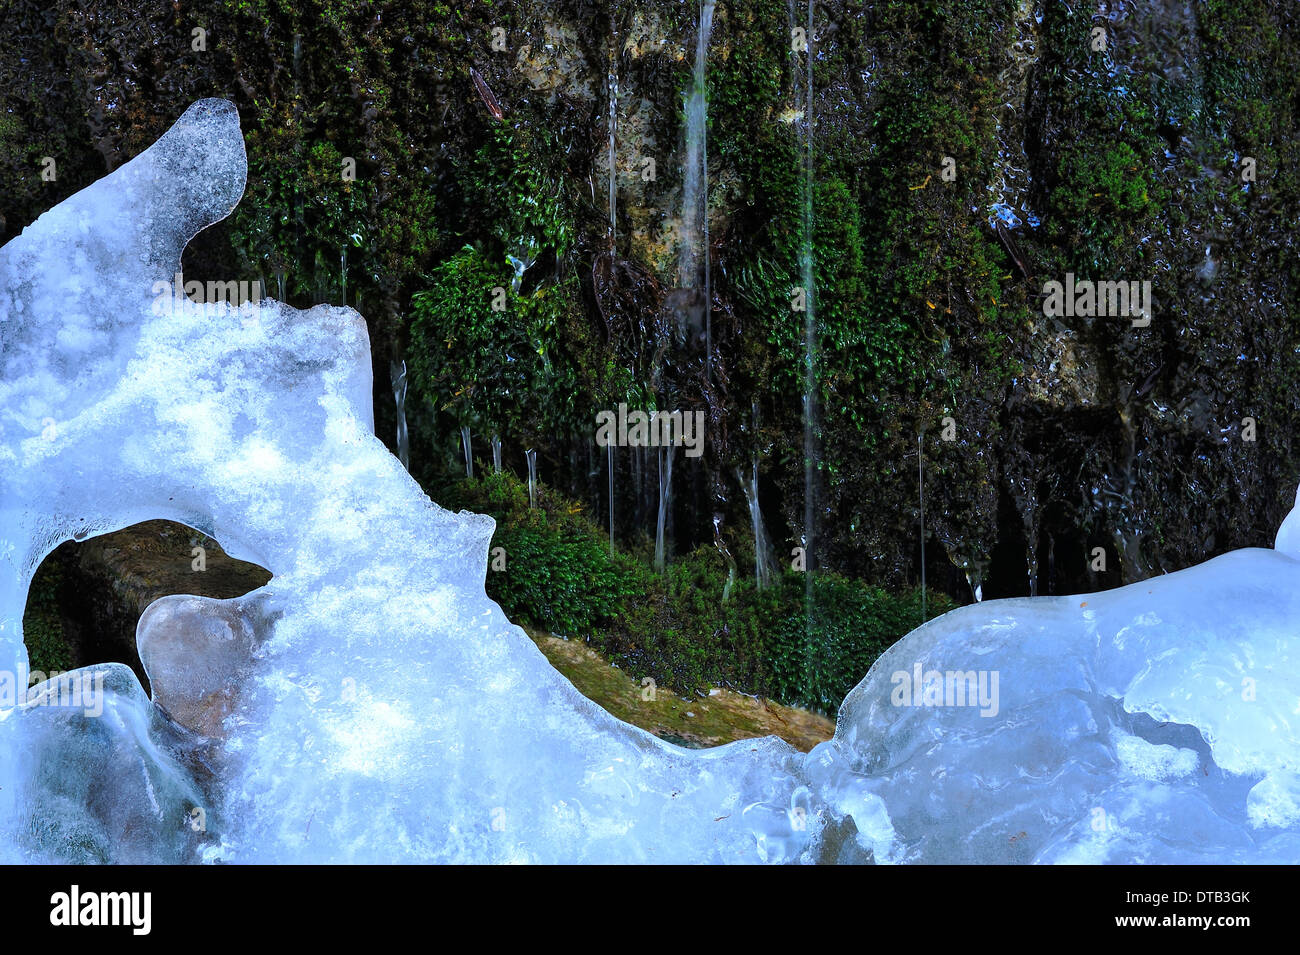 Melting Ice along a moss covered wall in the Maligne canyon of Jasper National Park Alberta Canada Stock Photo